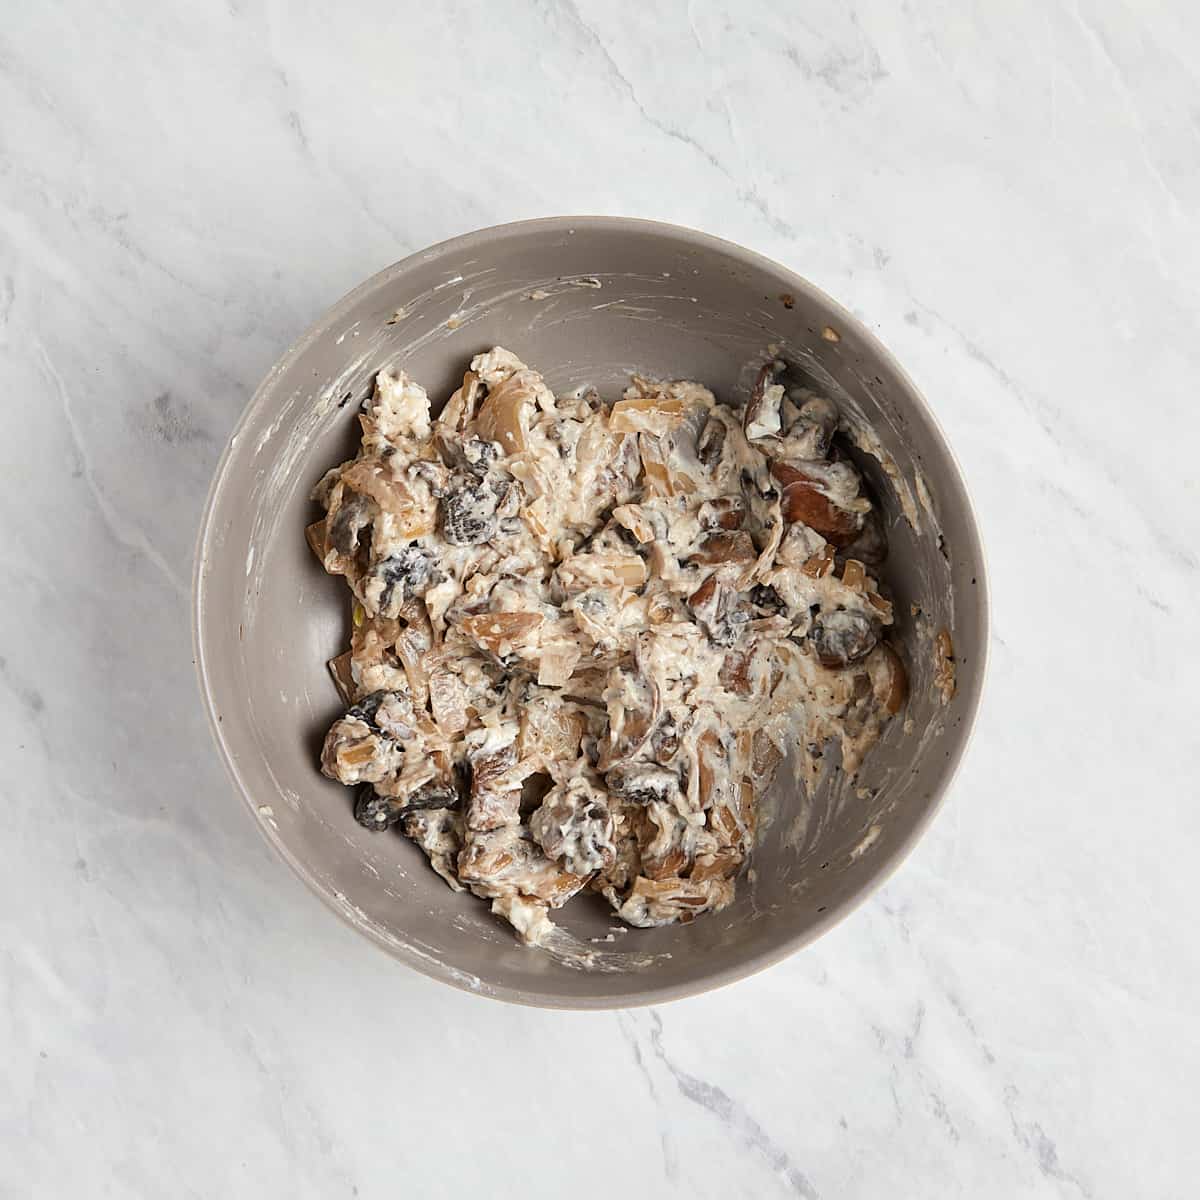 mushroom, shallot, and cheese mixture that has been combined in a bowl